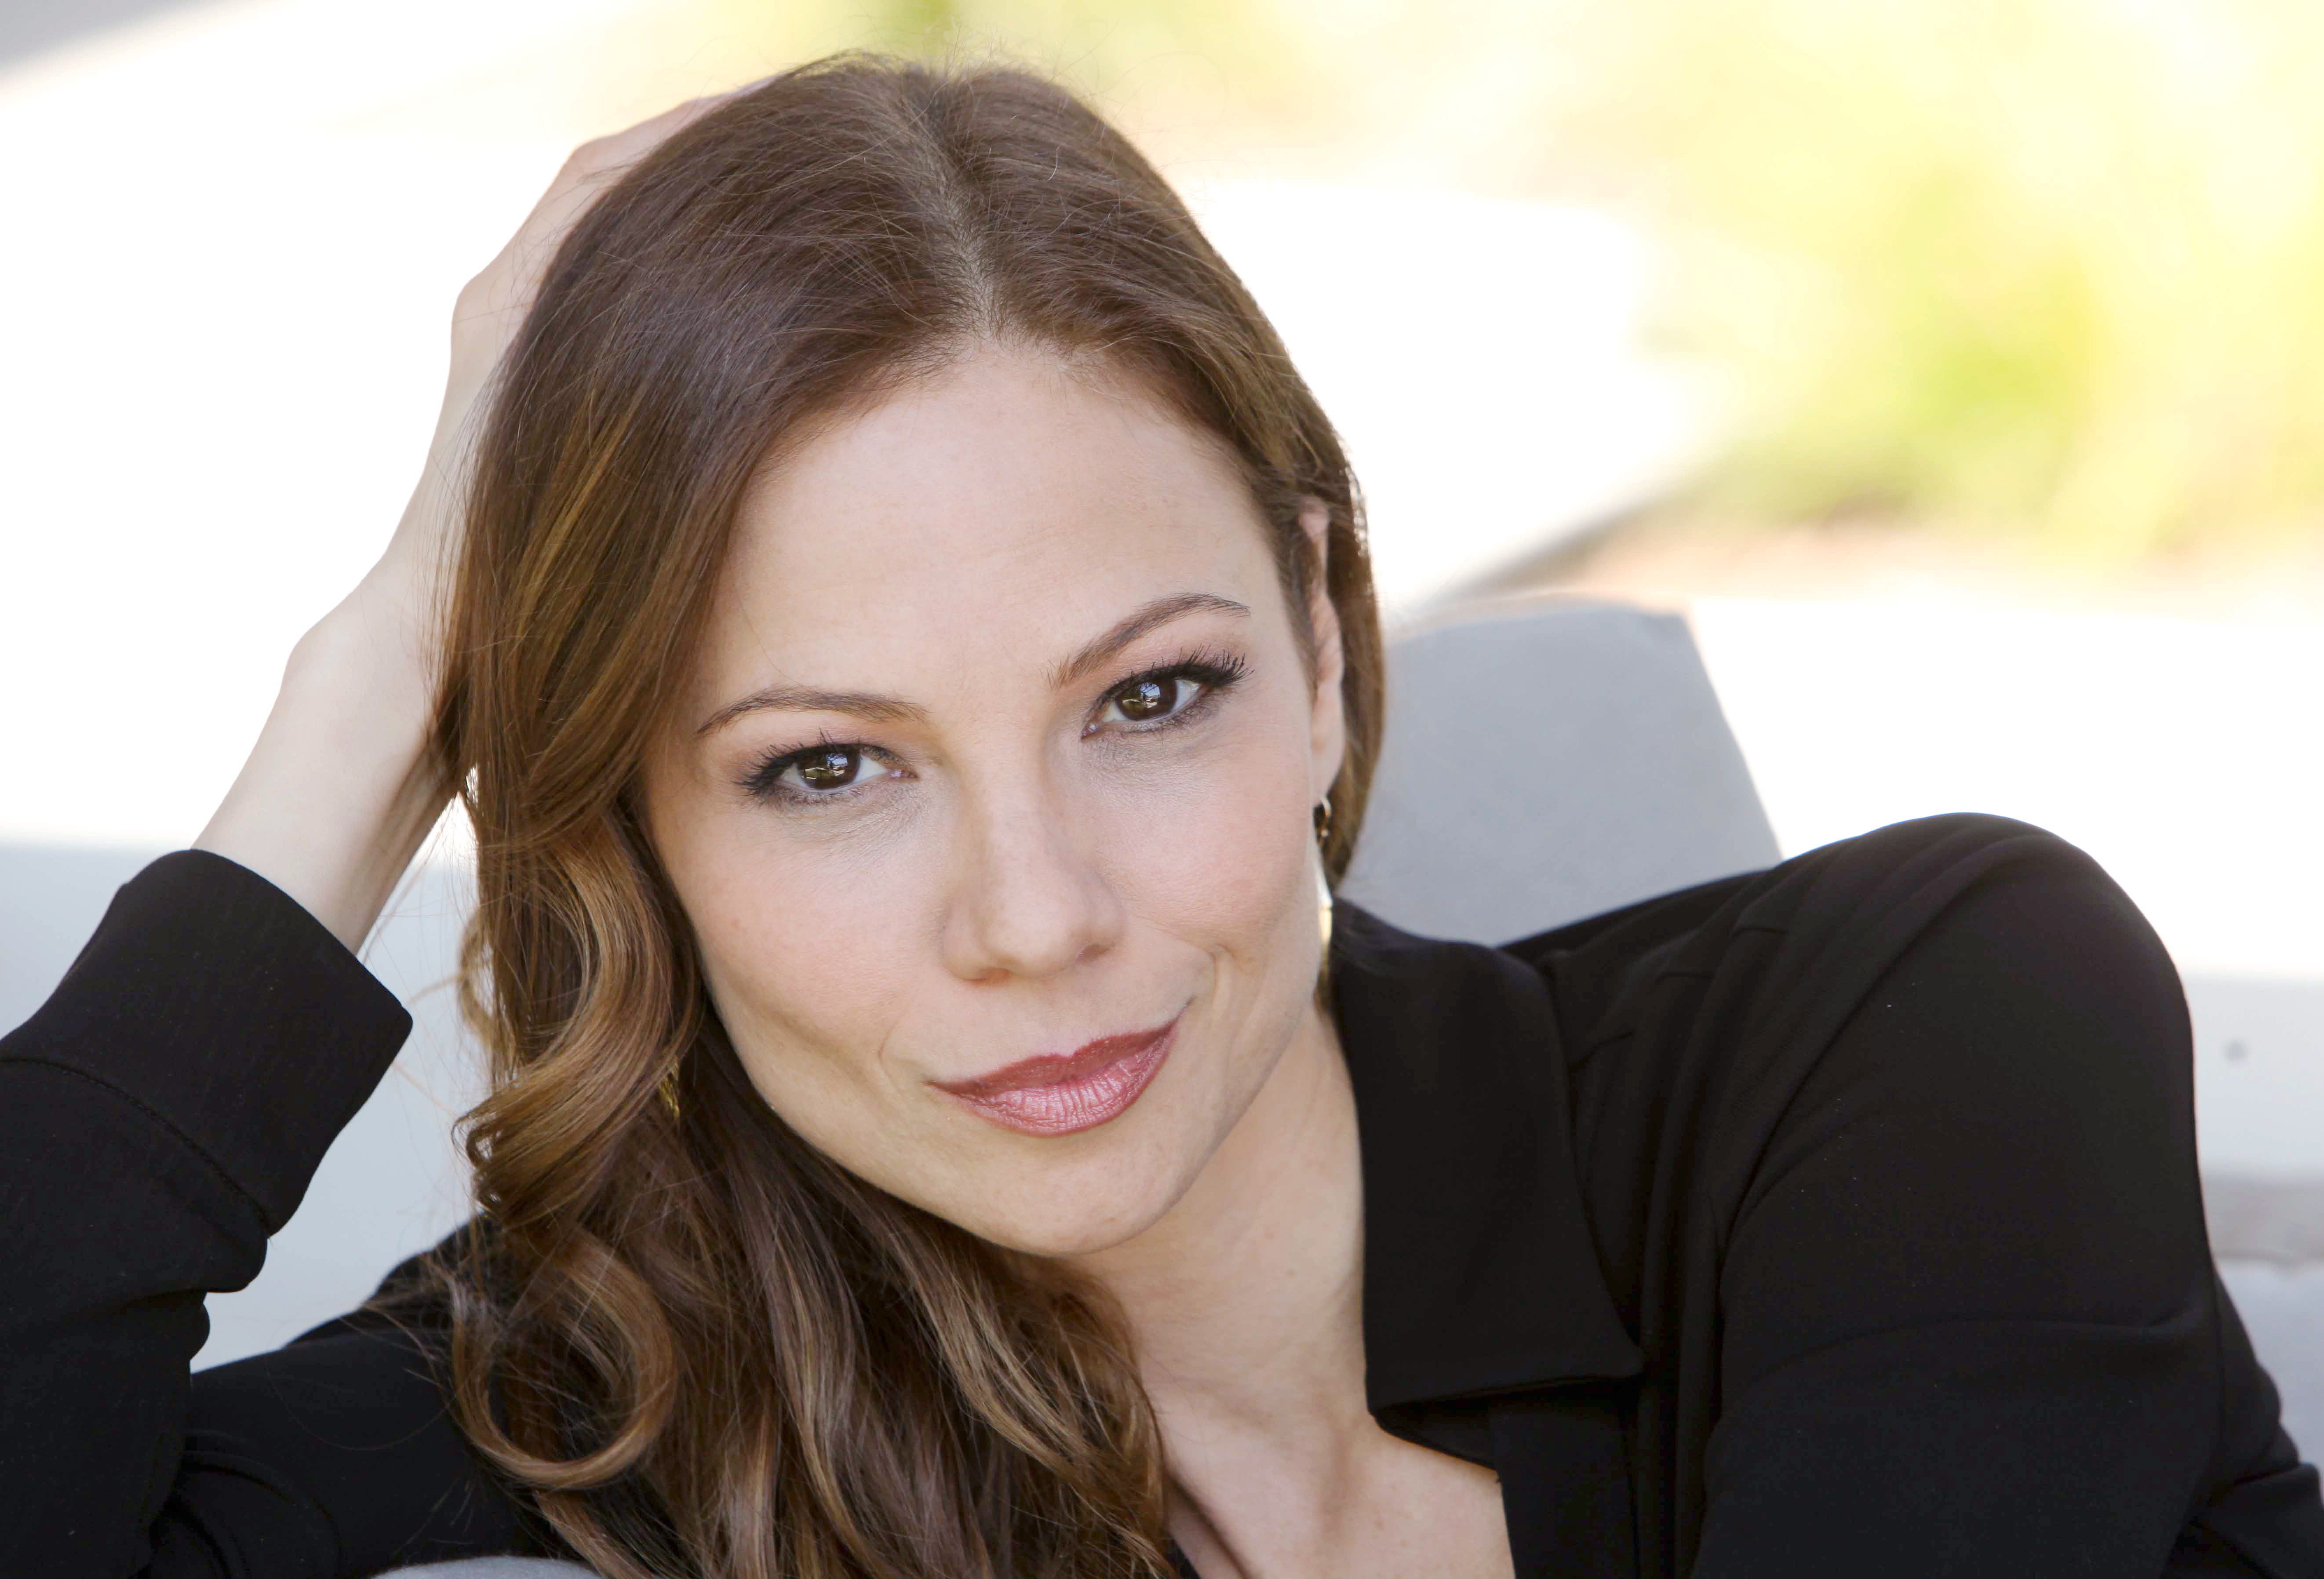 Tamara Braun Shares Behind The Scenes Photo With DAYS OF OUR LIVES Co-Stars...